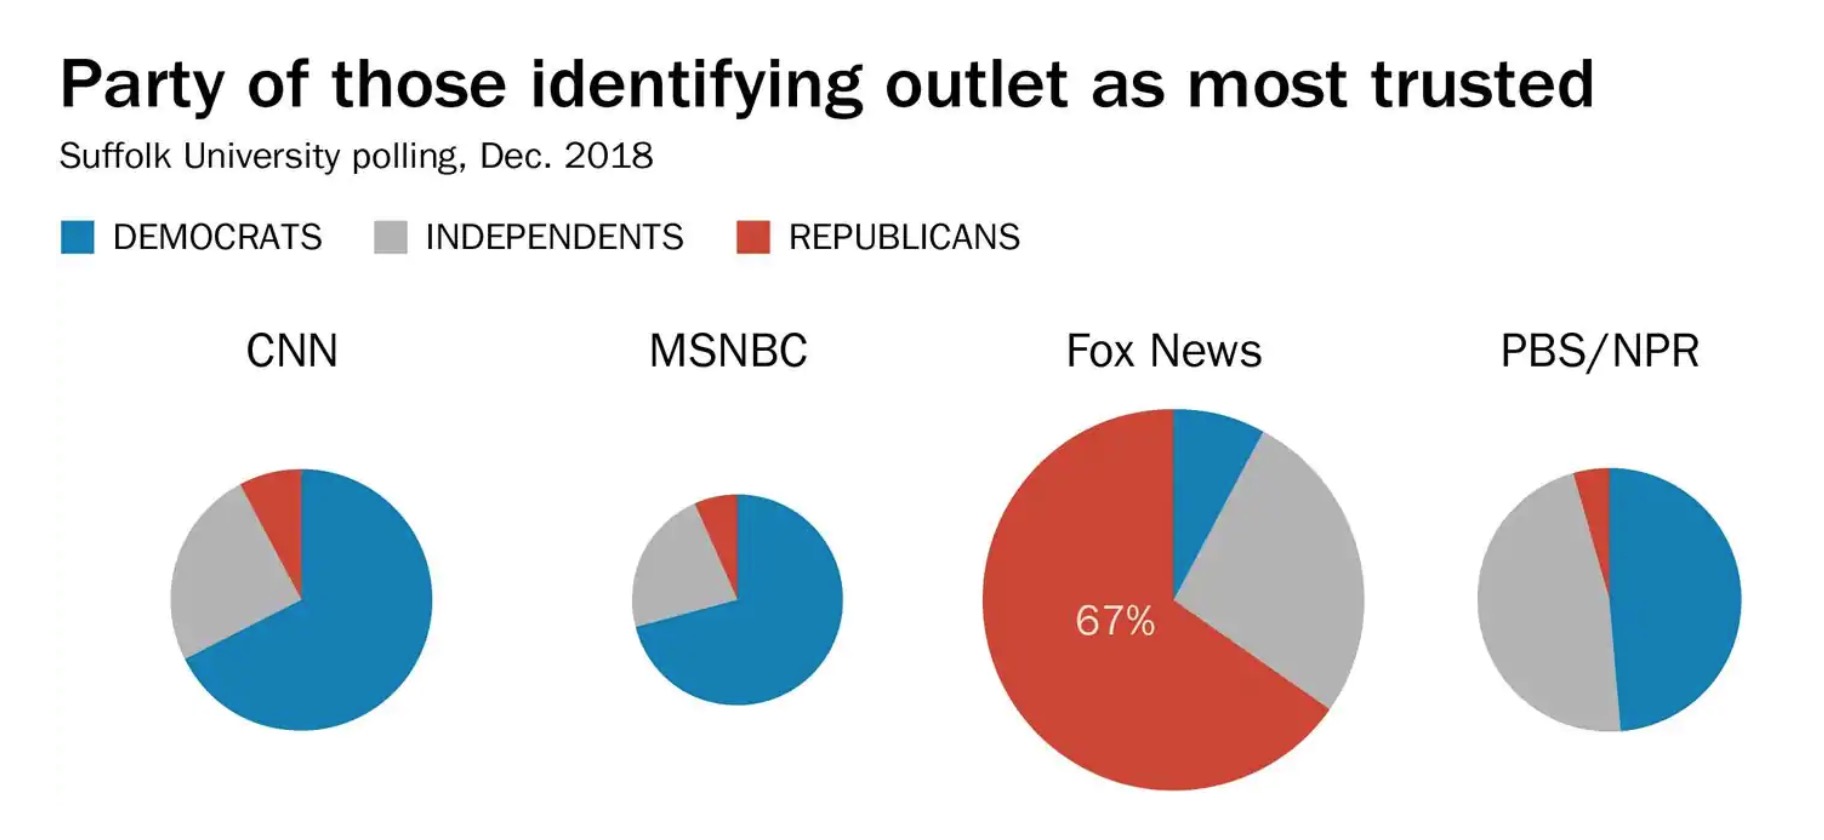 Partisanship of news consumers